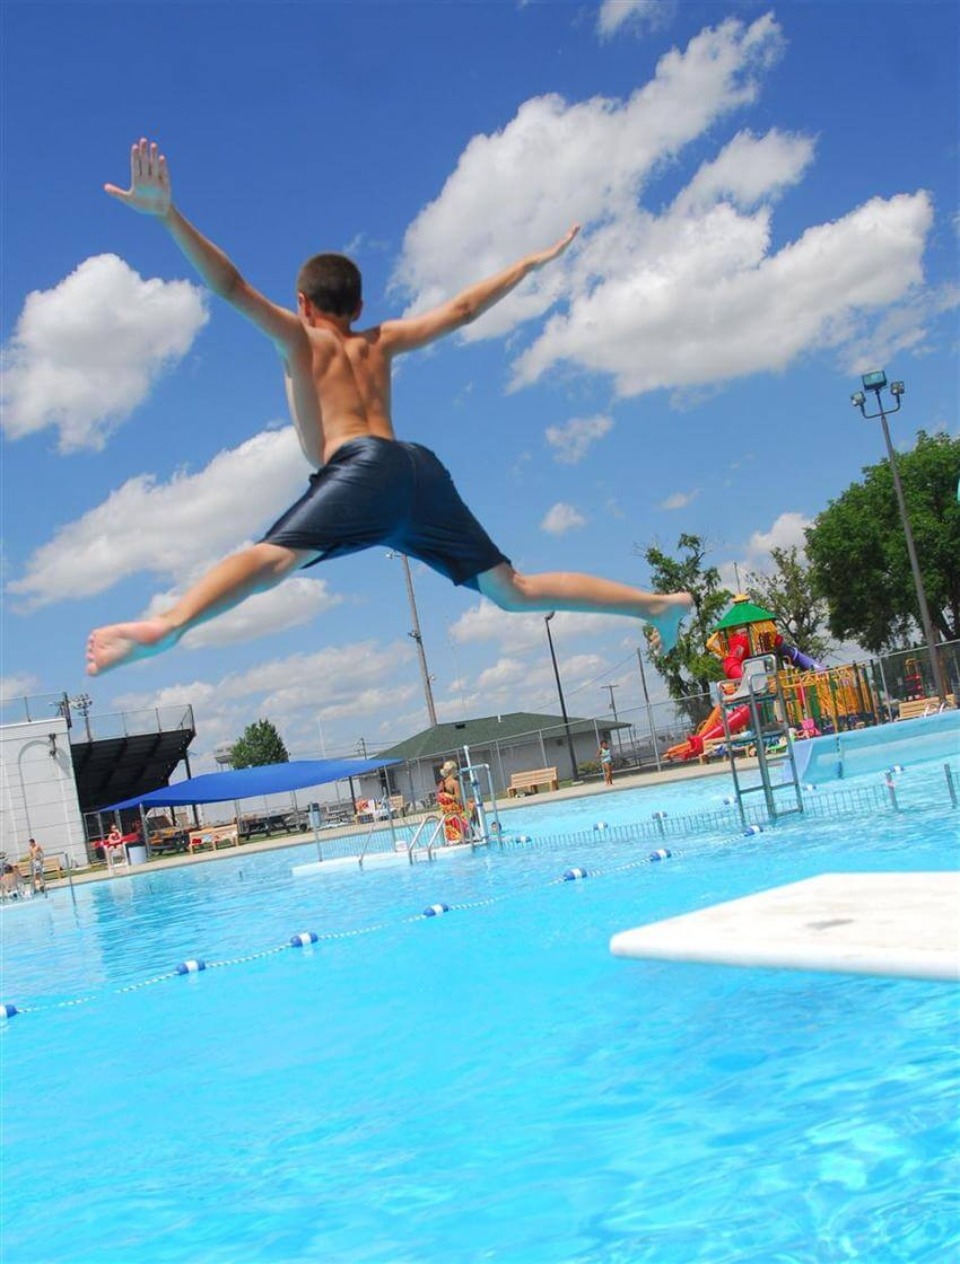 Kid jumping into a public pool on a bright day.